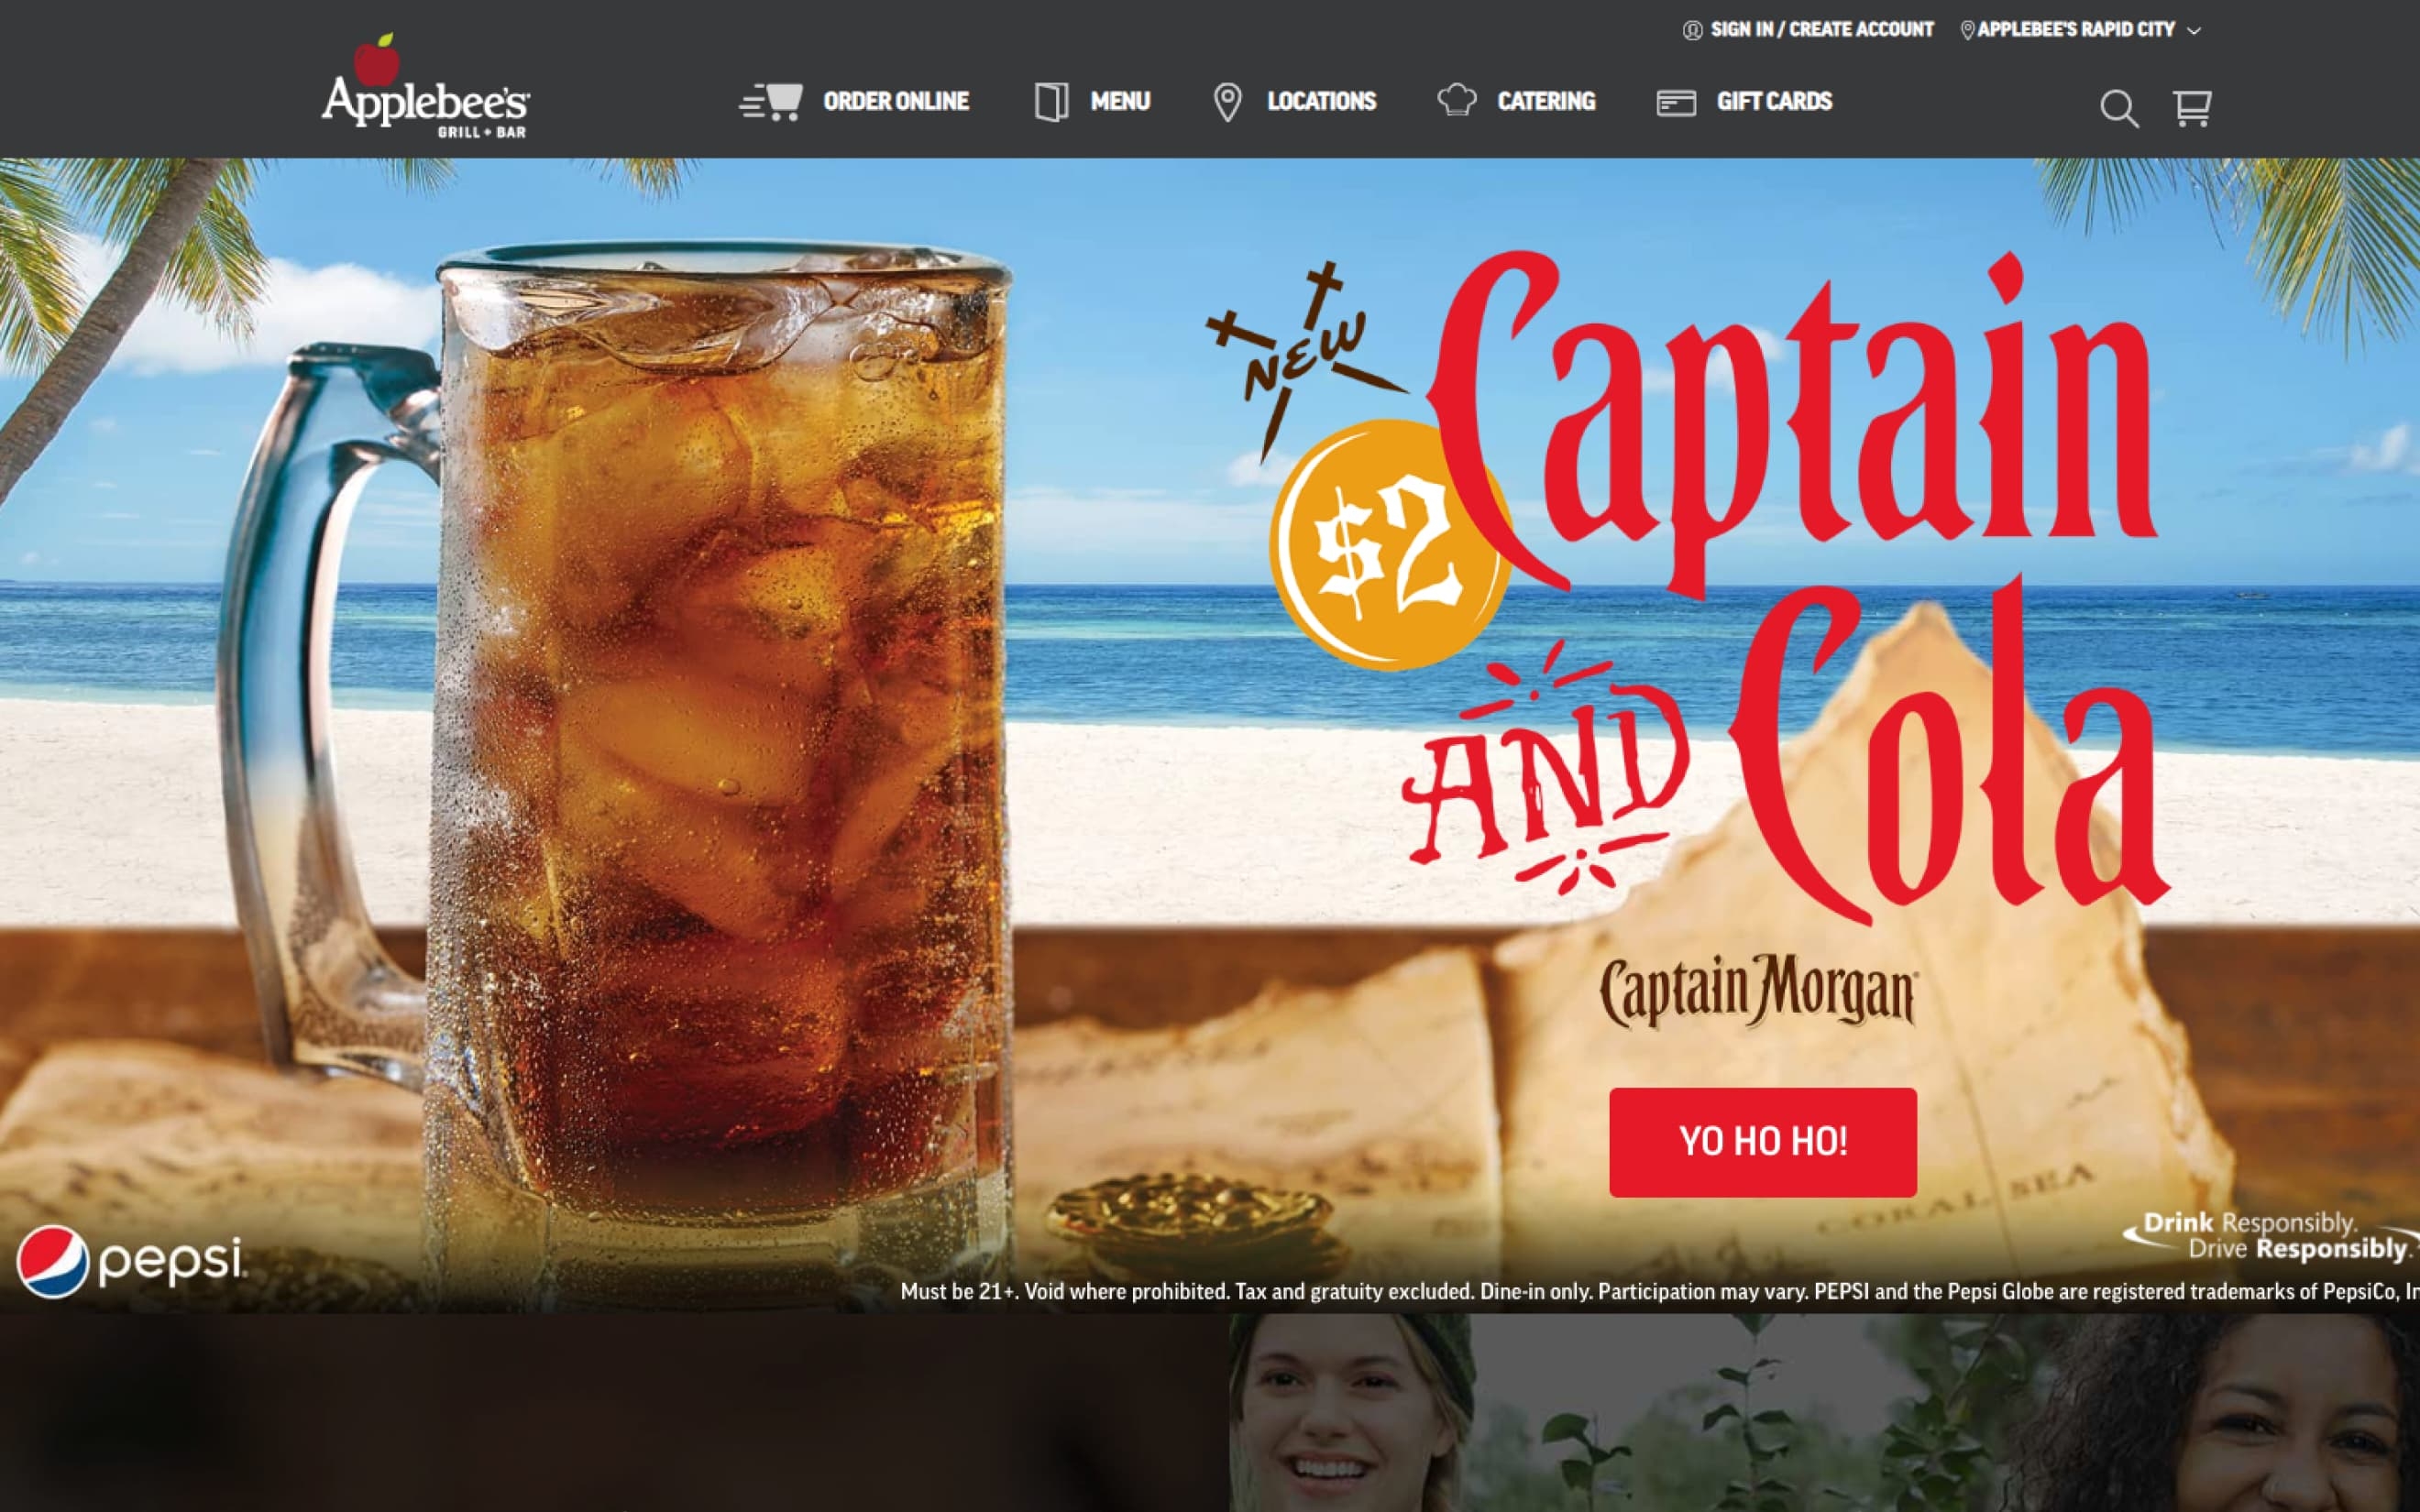 A promotional image showing the Applebee's website being advertised for $2 at Applebee's. The background features a beach scene with palm trees and a clear blue sky.